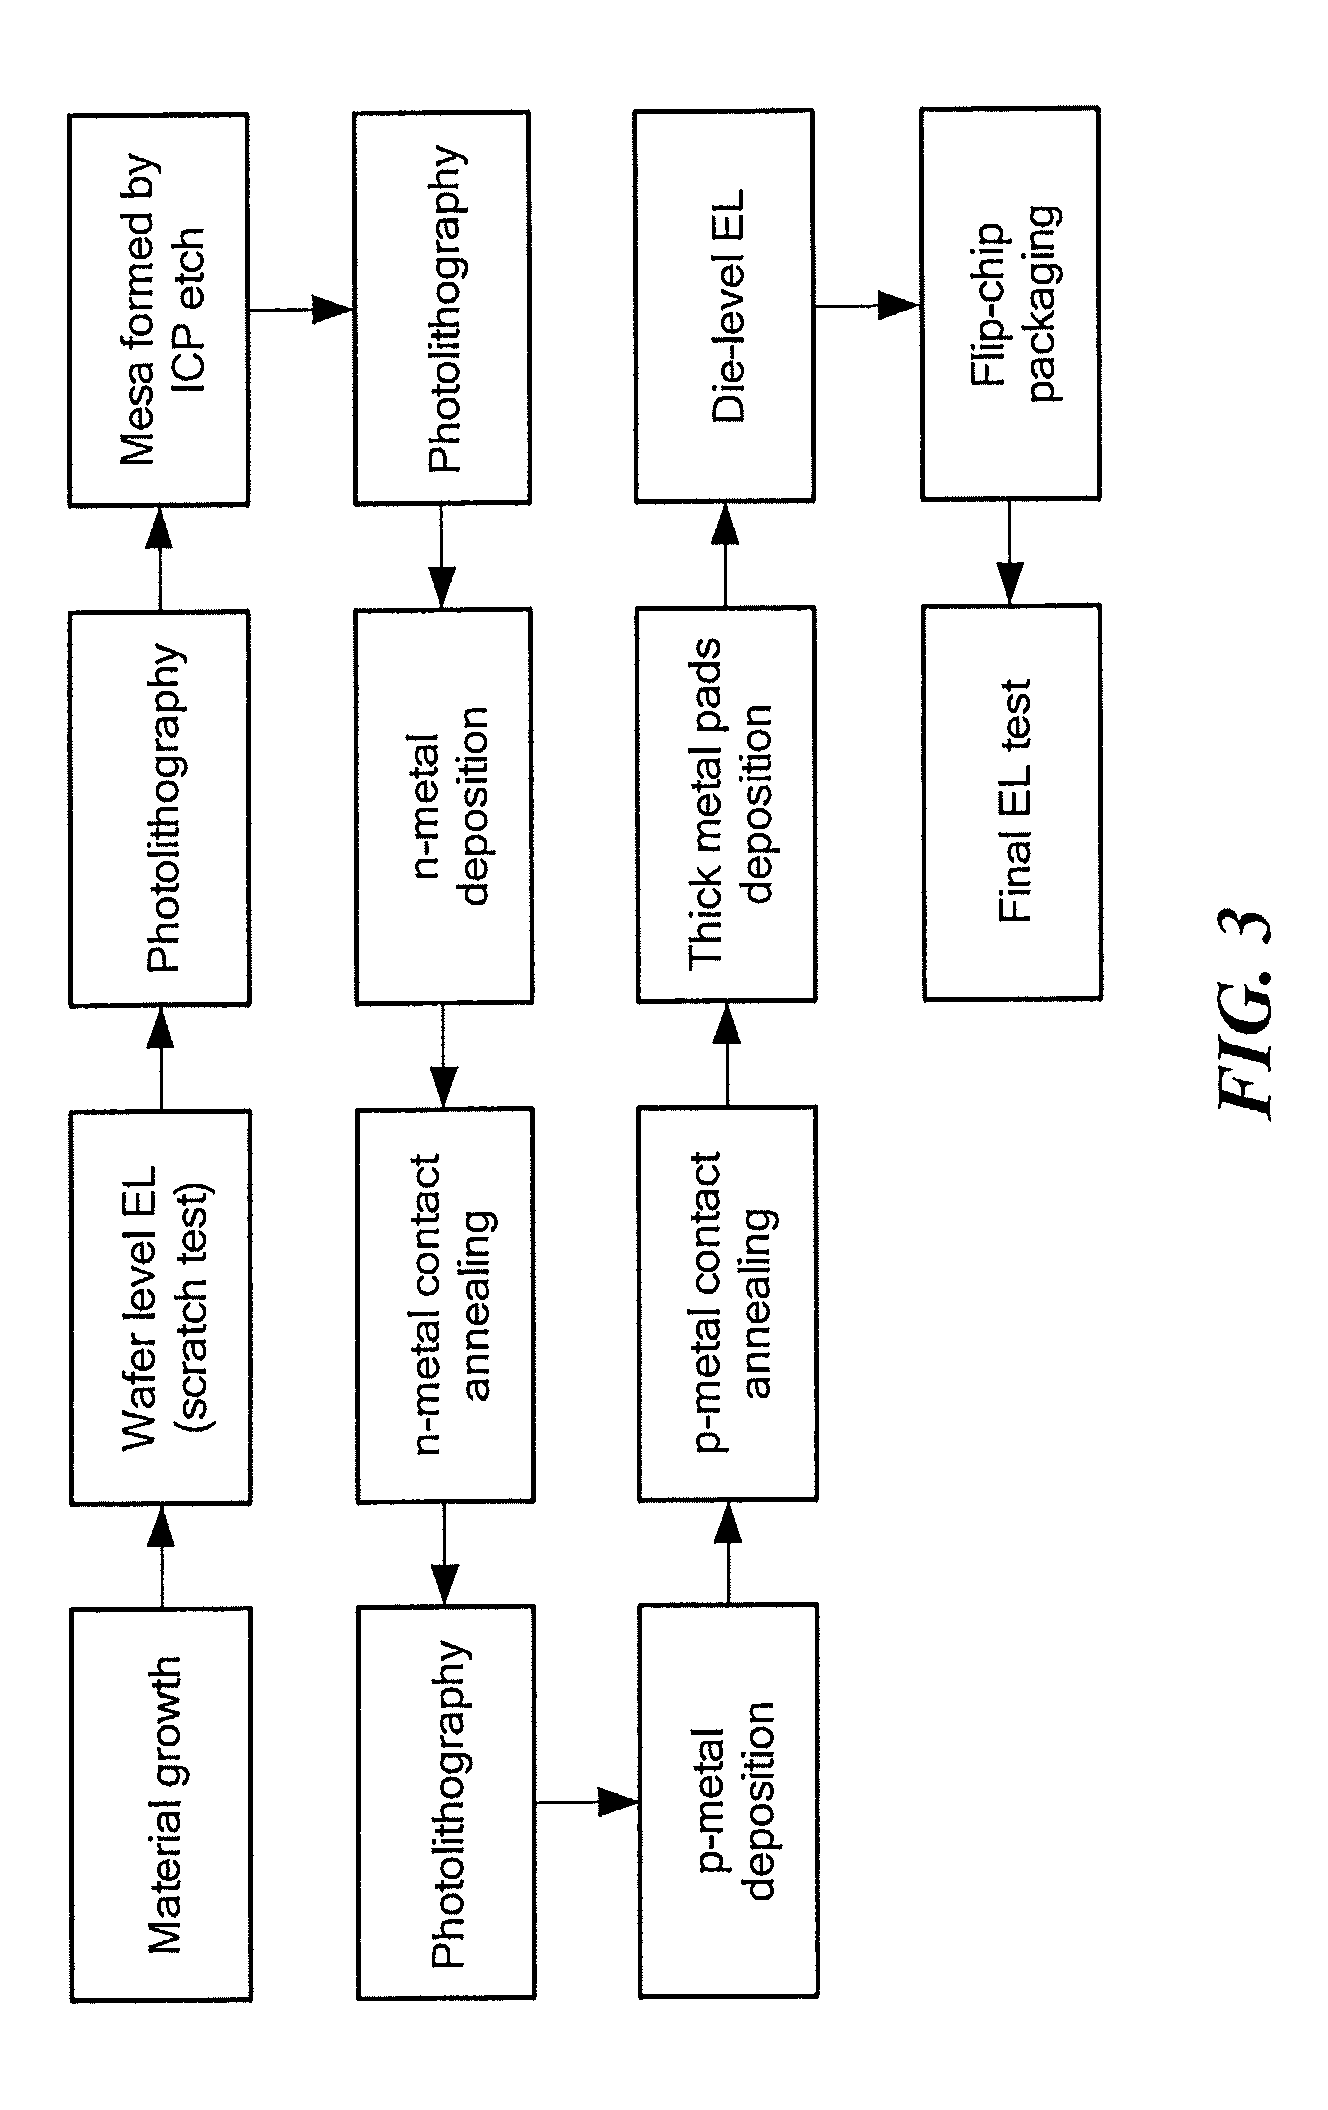 High efficiency ultraviolet light emitting diode with band structure potential fluctuations